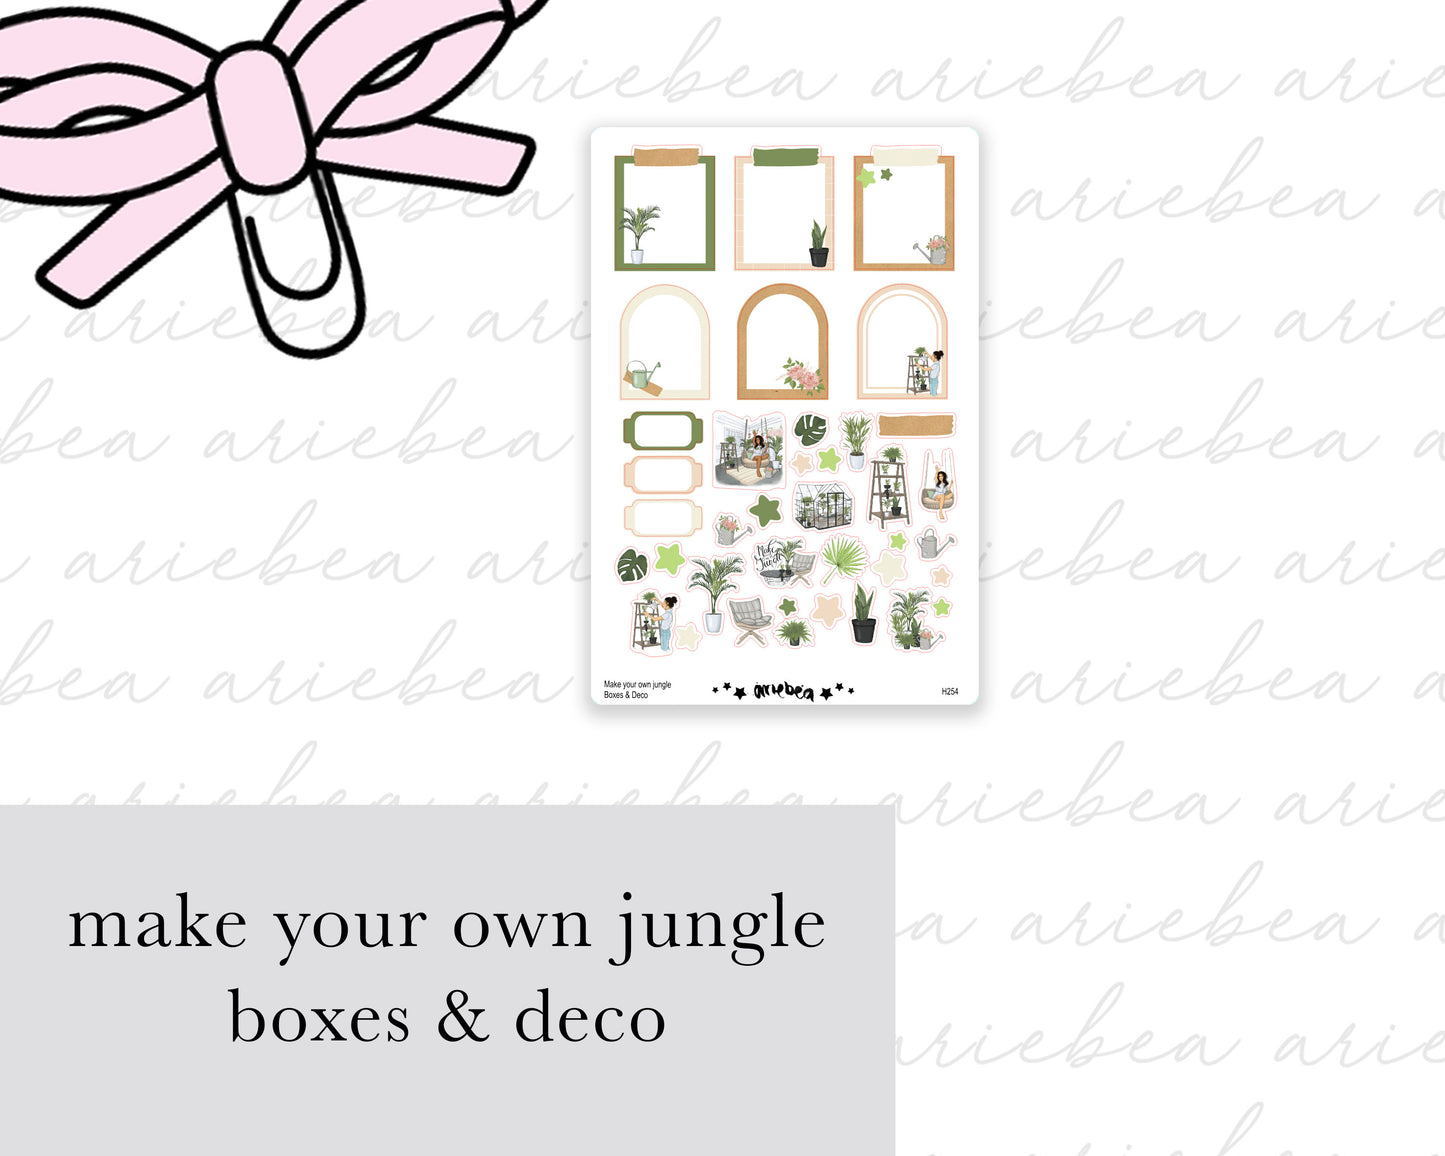 Make Your Own Jungle Boxes & Deco